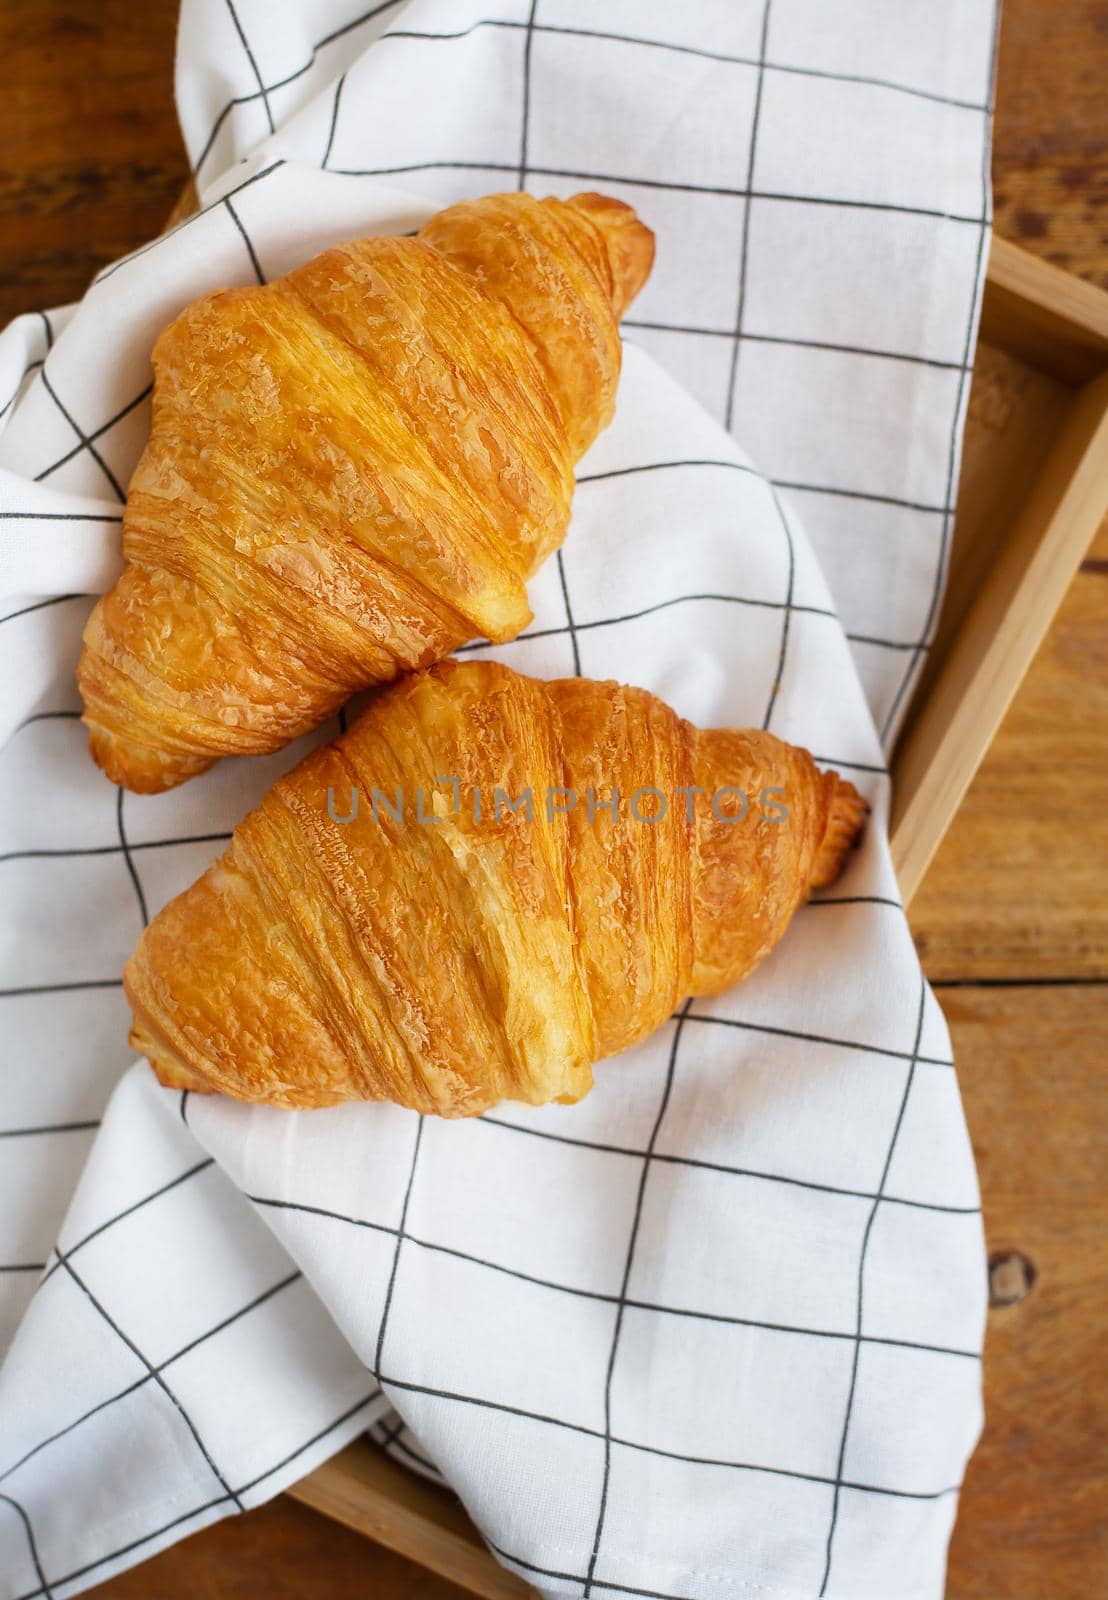 Breakfast in bed, fresh croissants and a cup of coffee on a wooden tray. Fine morning